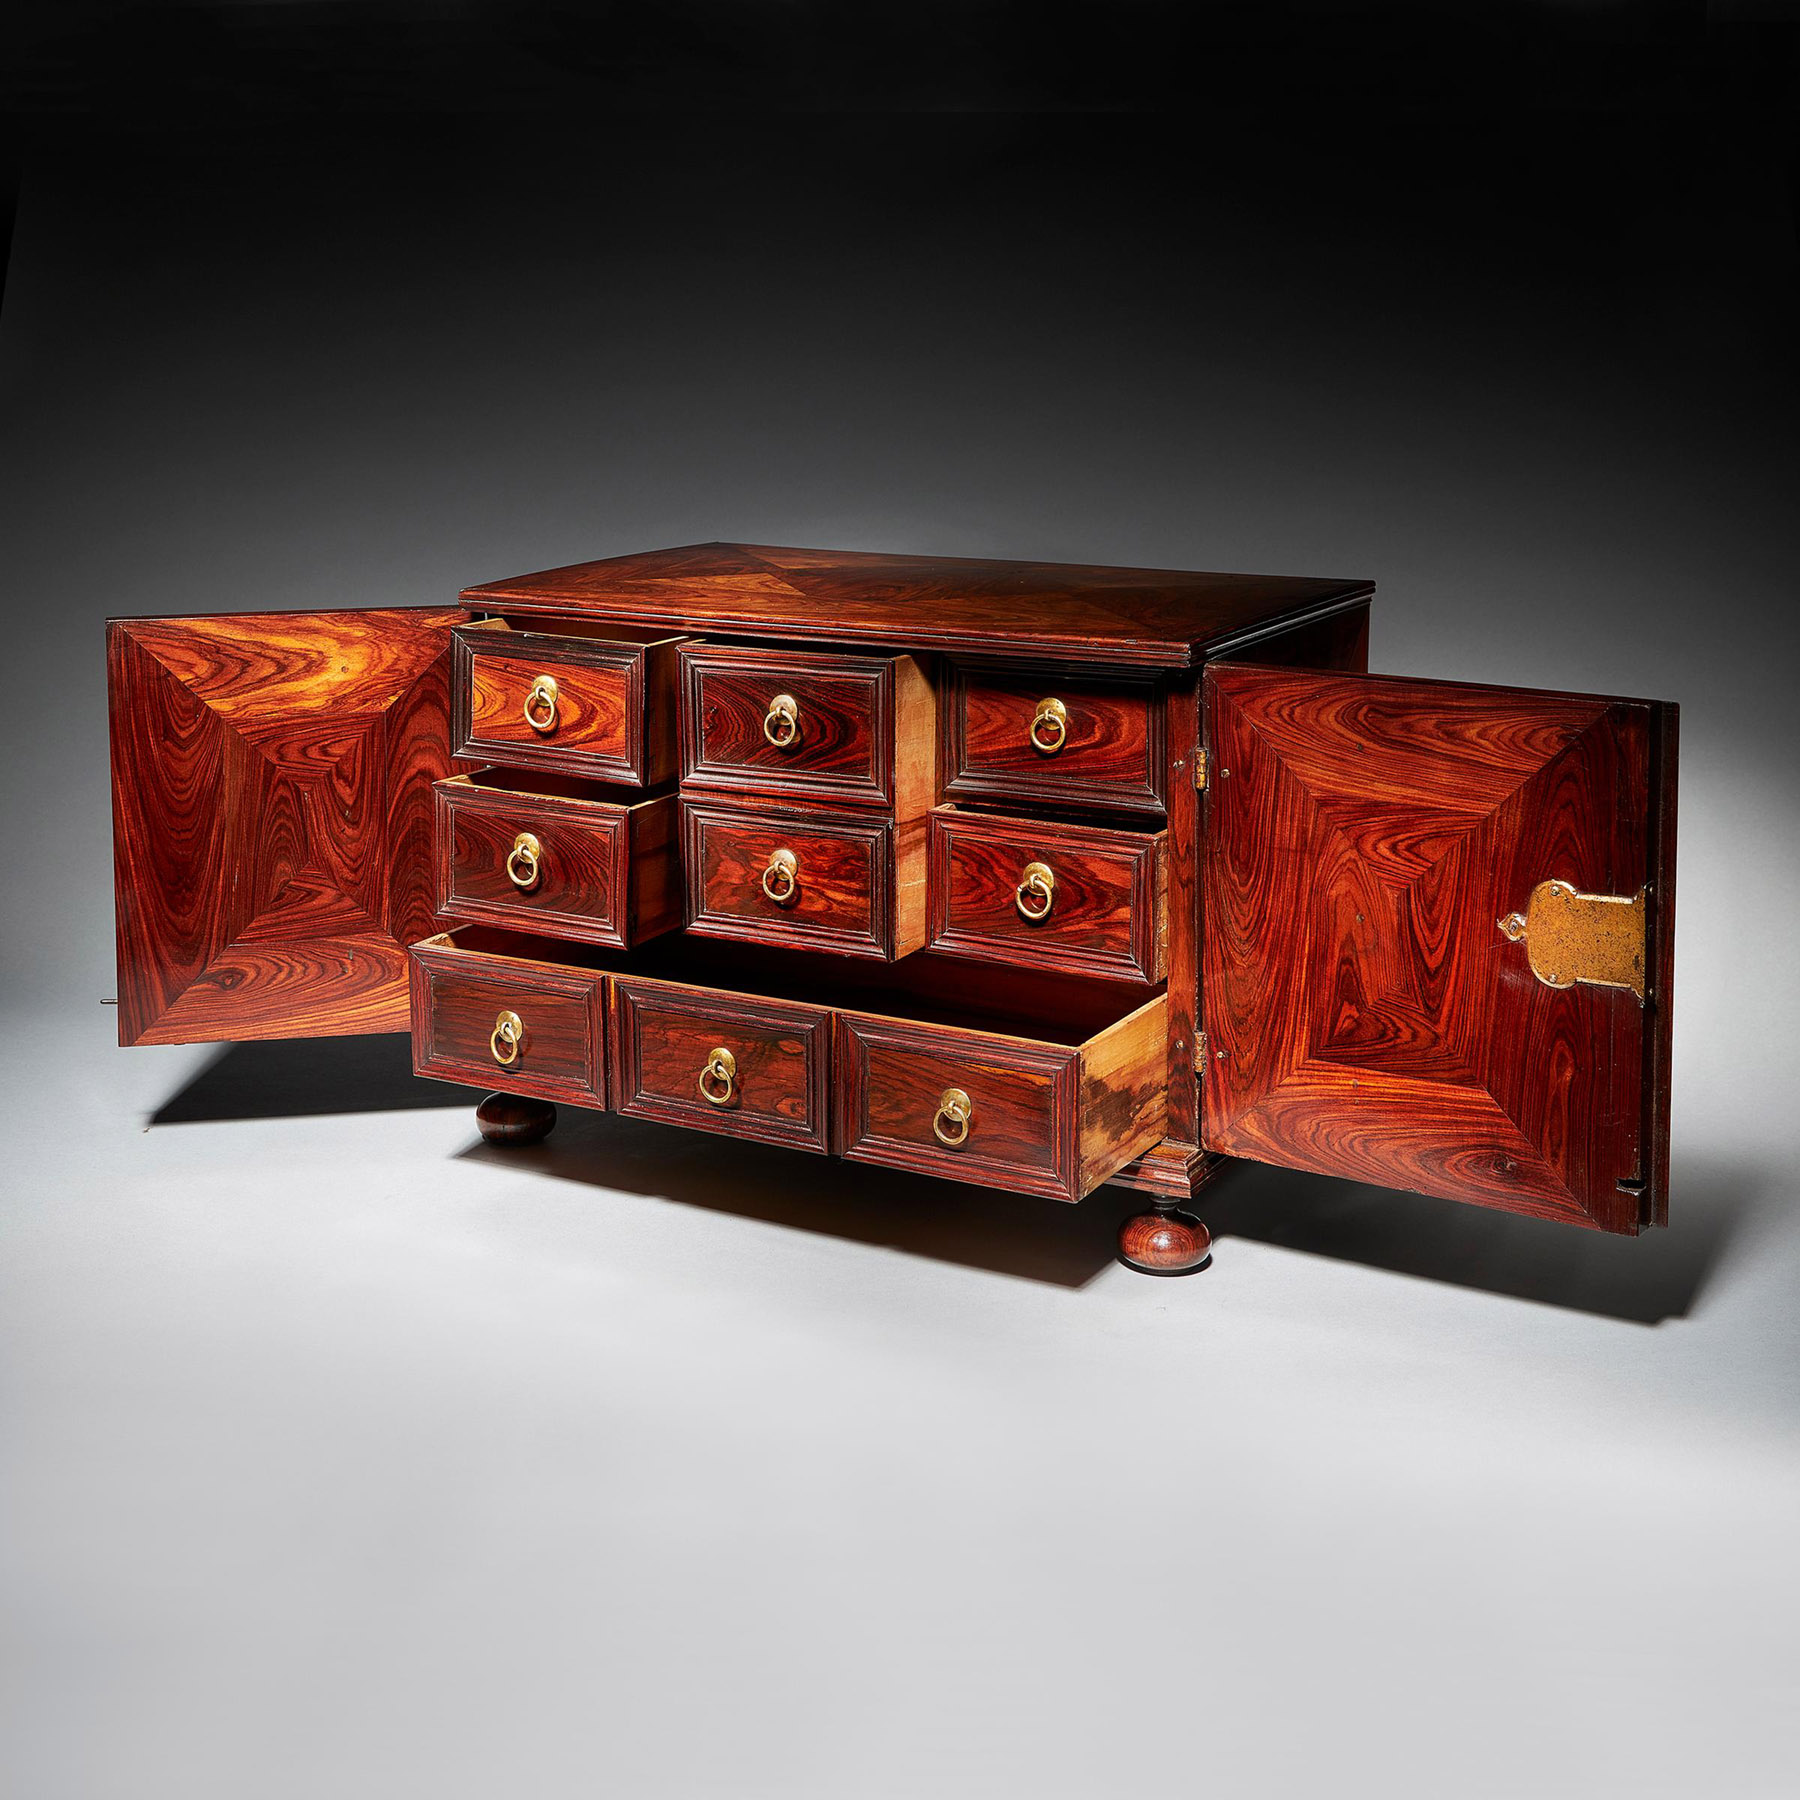 Extremely Rare and Fine Miniature Kingwood Table Cabinet from the Reign of Charles II 7